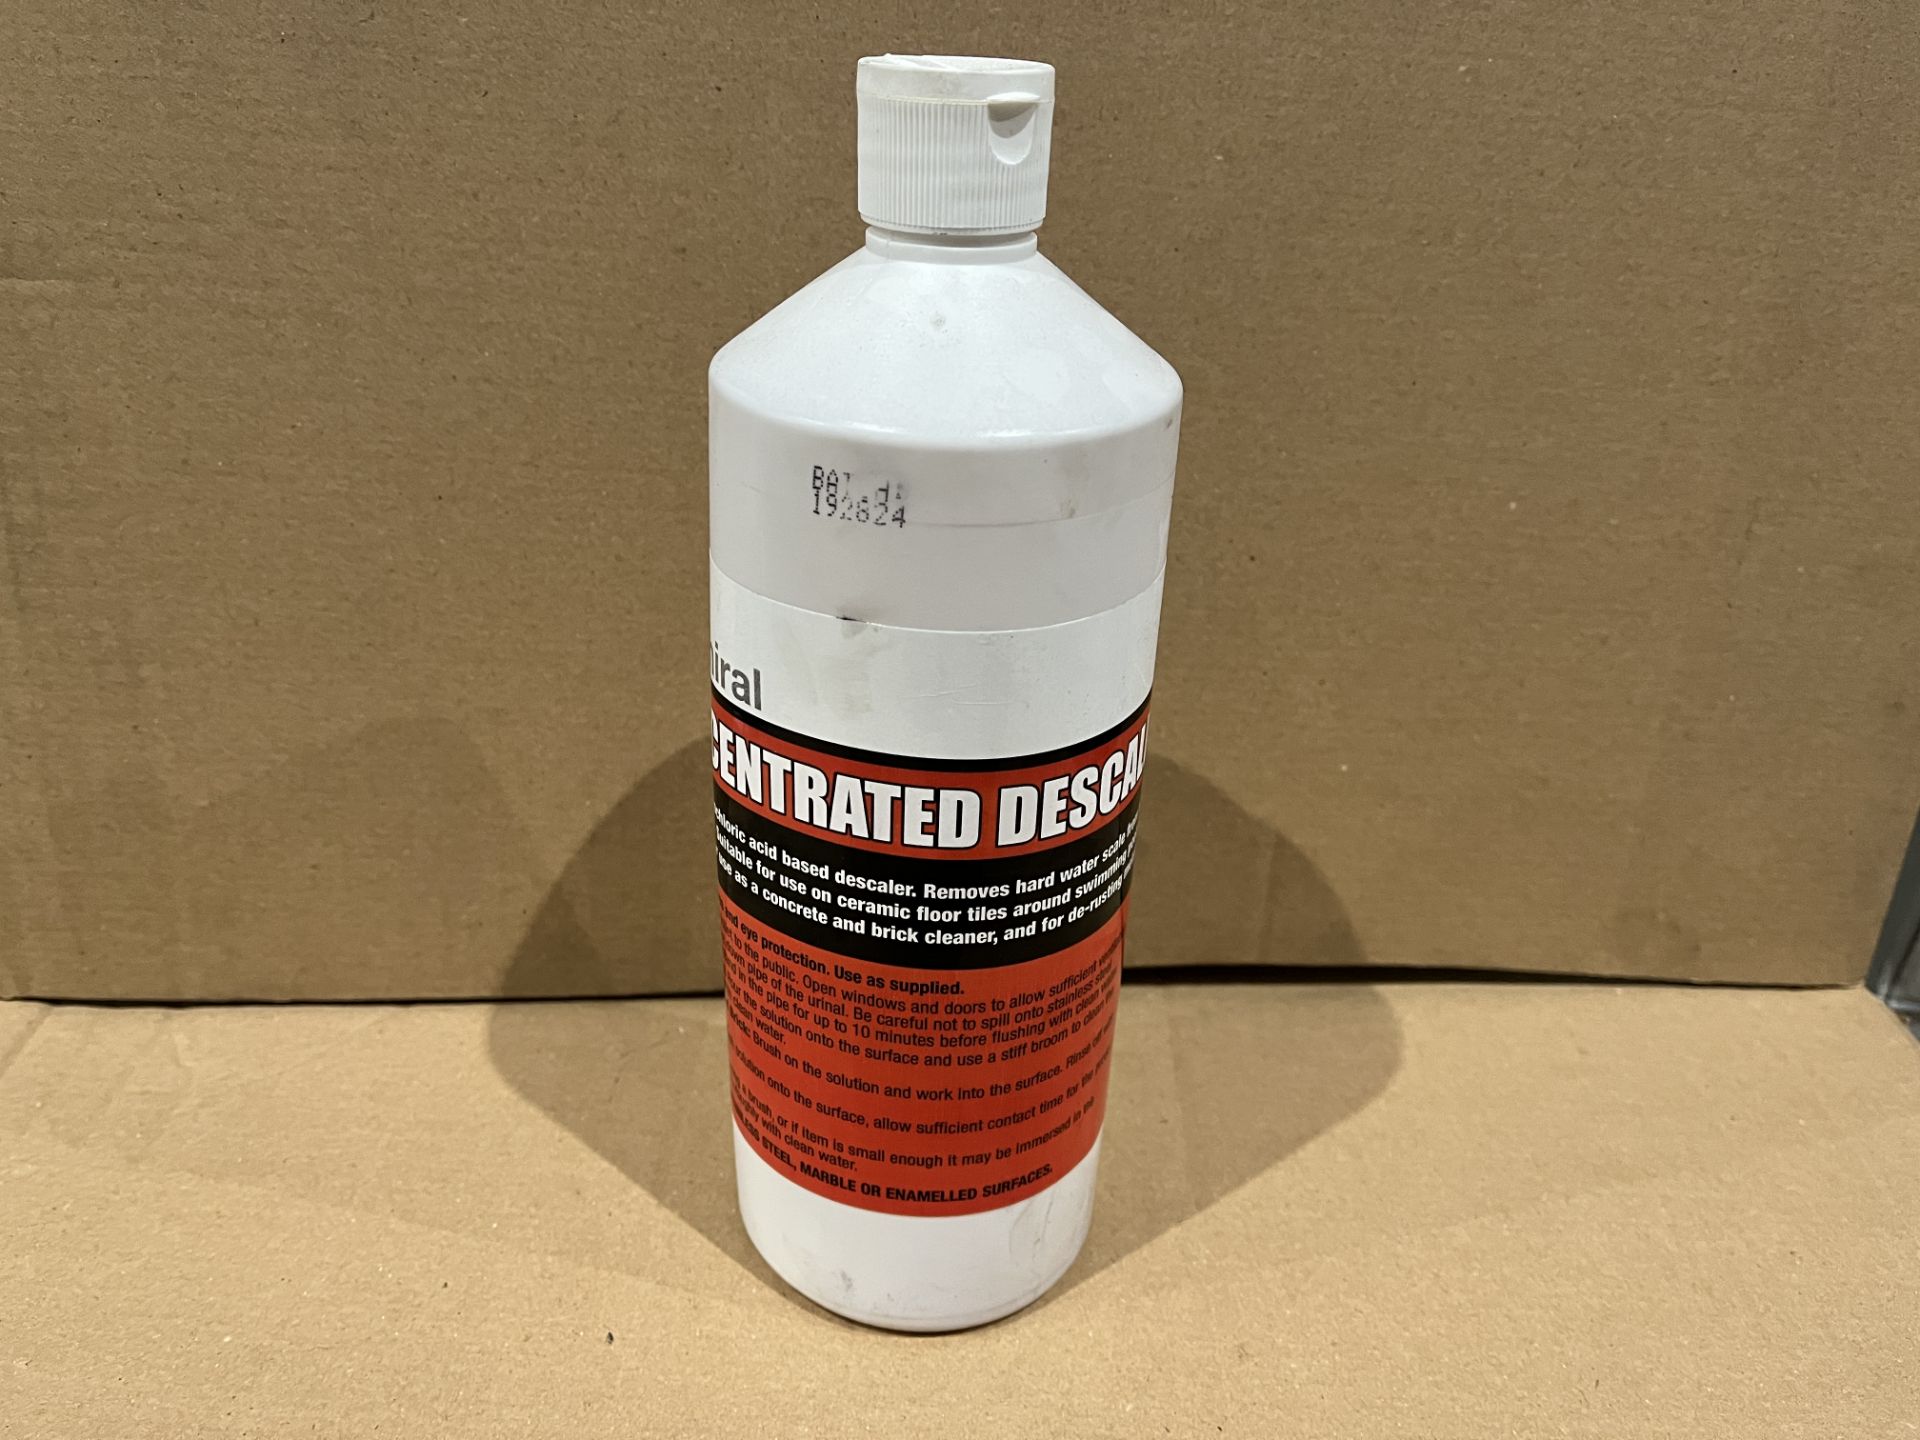 32 X BRAND NEW ADMIRAL PROFESSIONAL CONCENTRATED DESCALER 1L R10-12